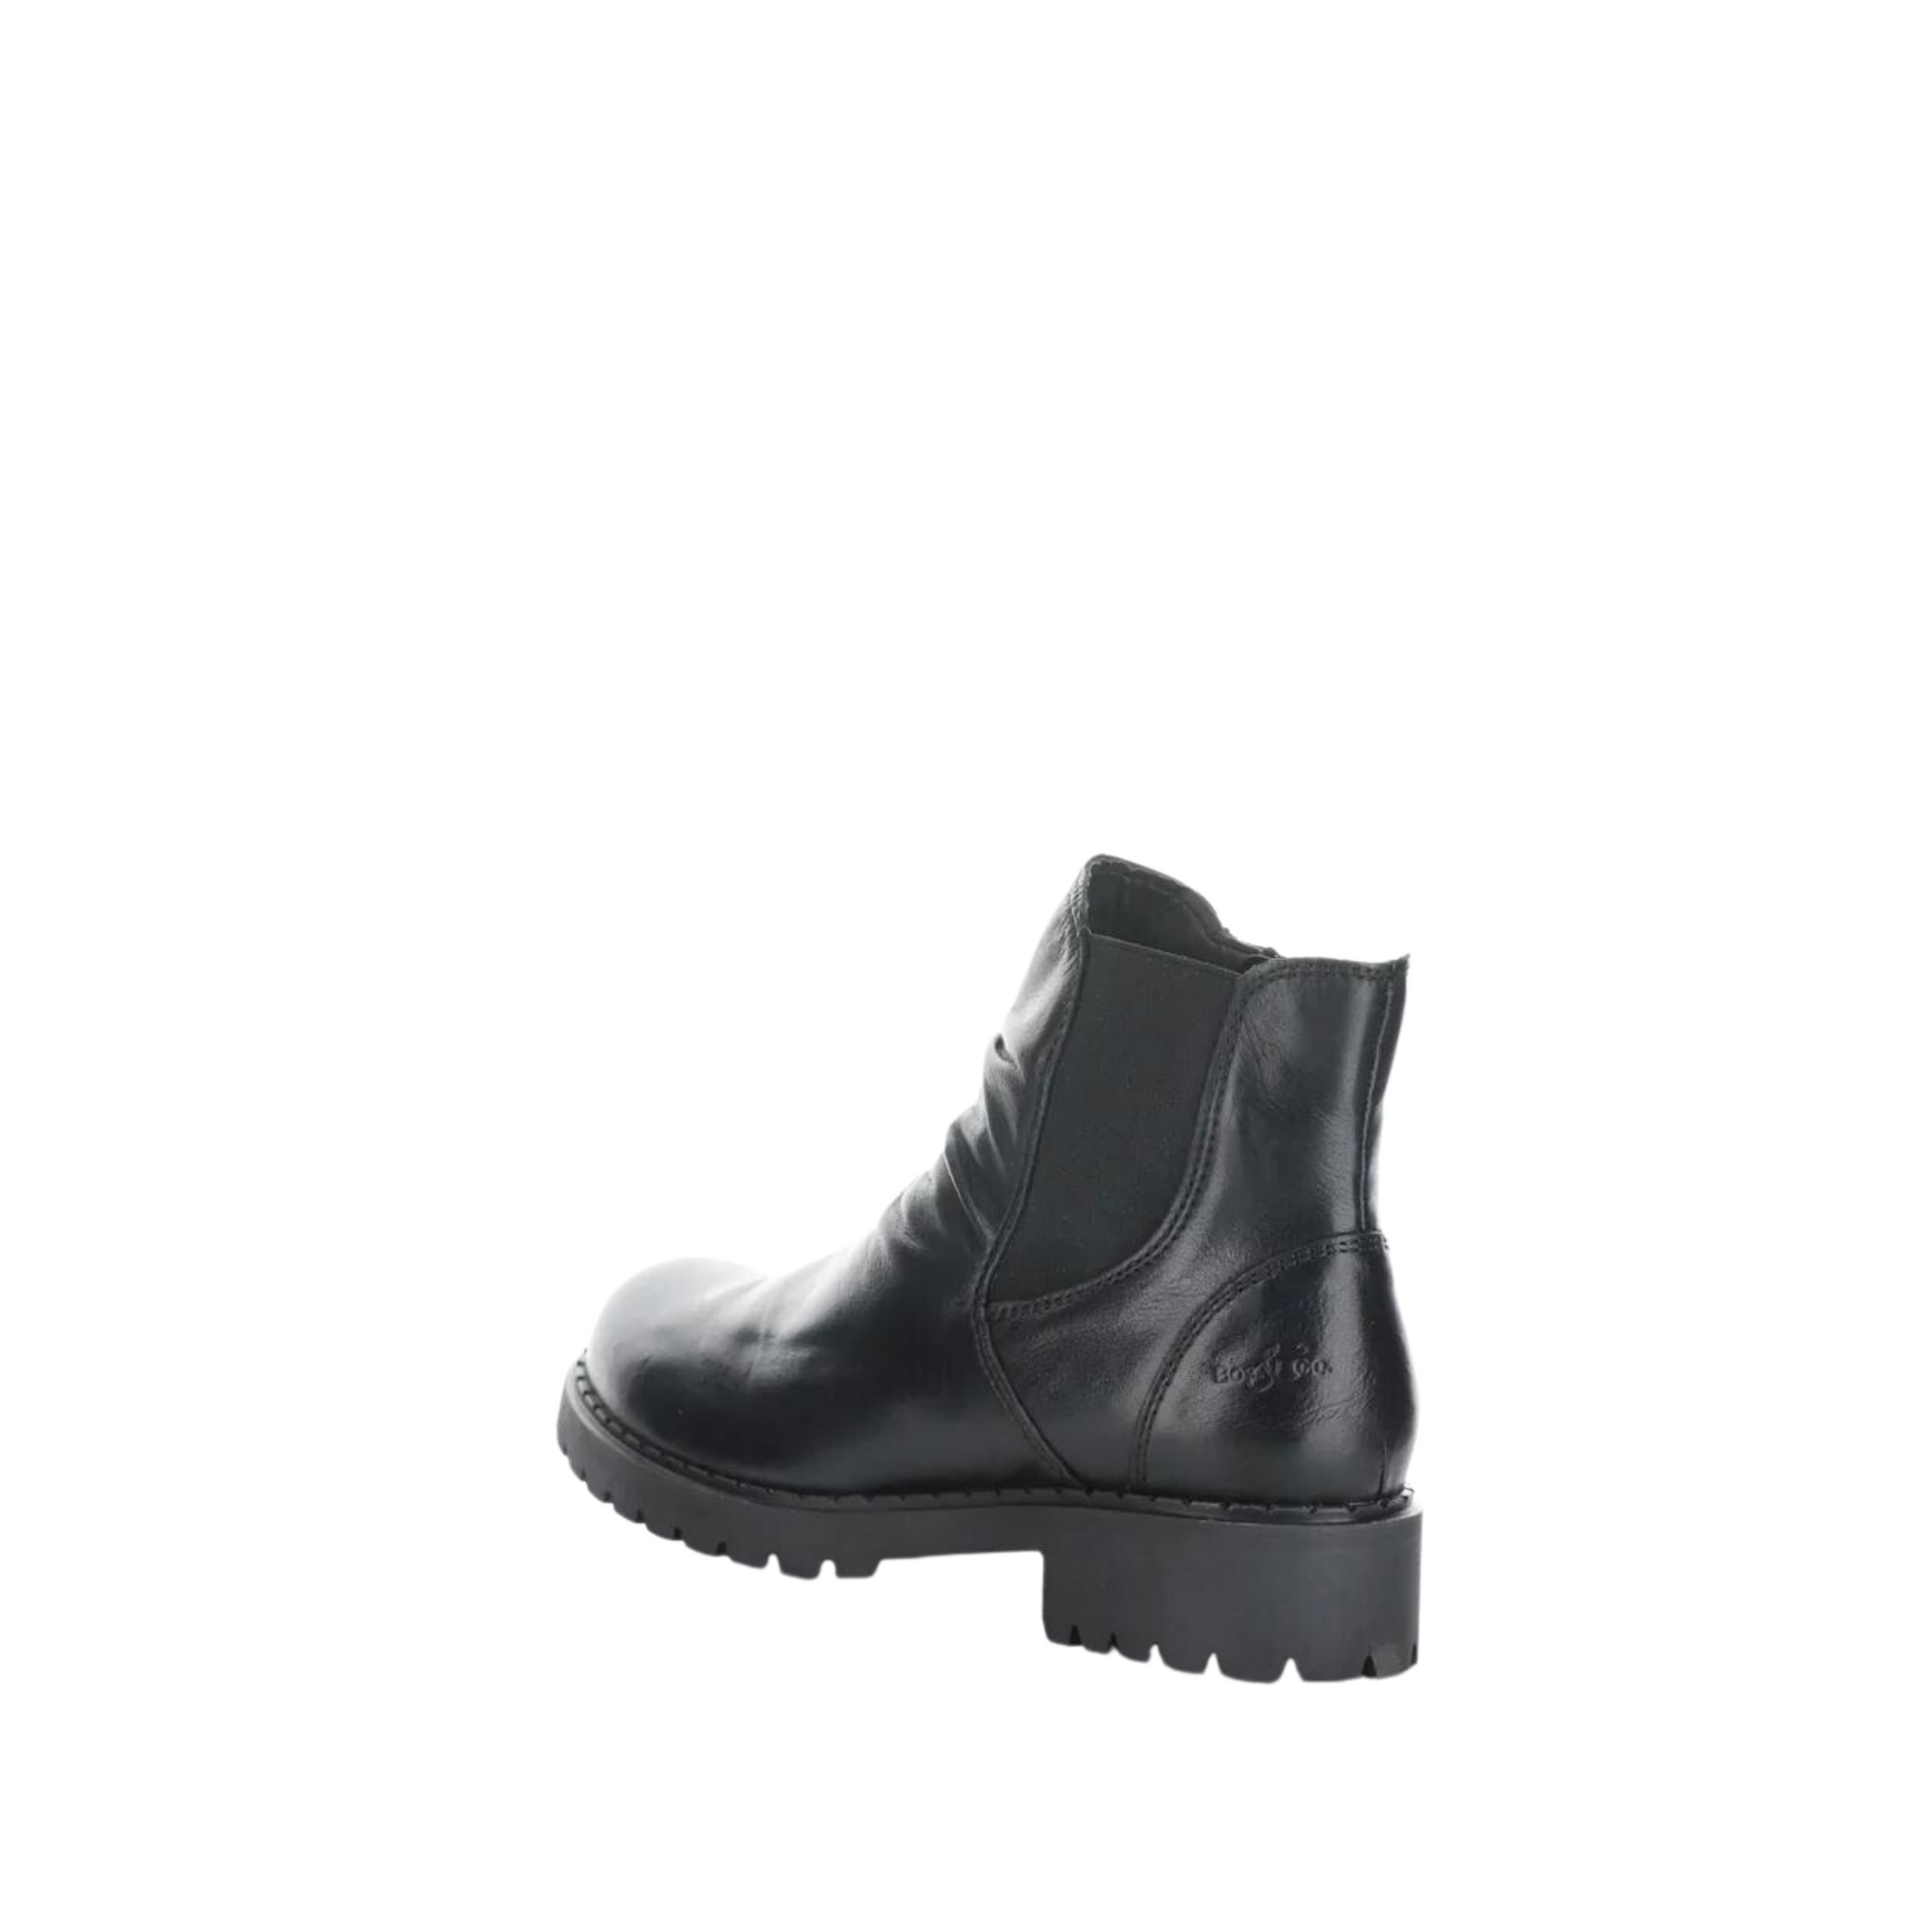 Rear angled profile of the Bos & Co Barb Boot in the colour Black.